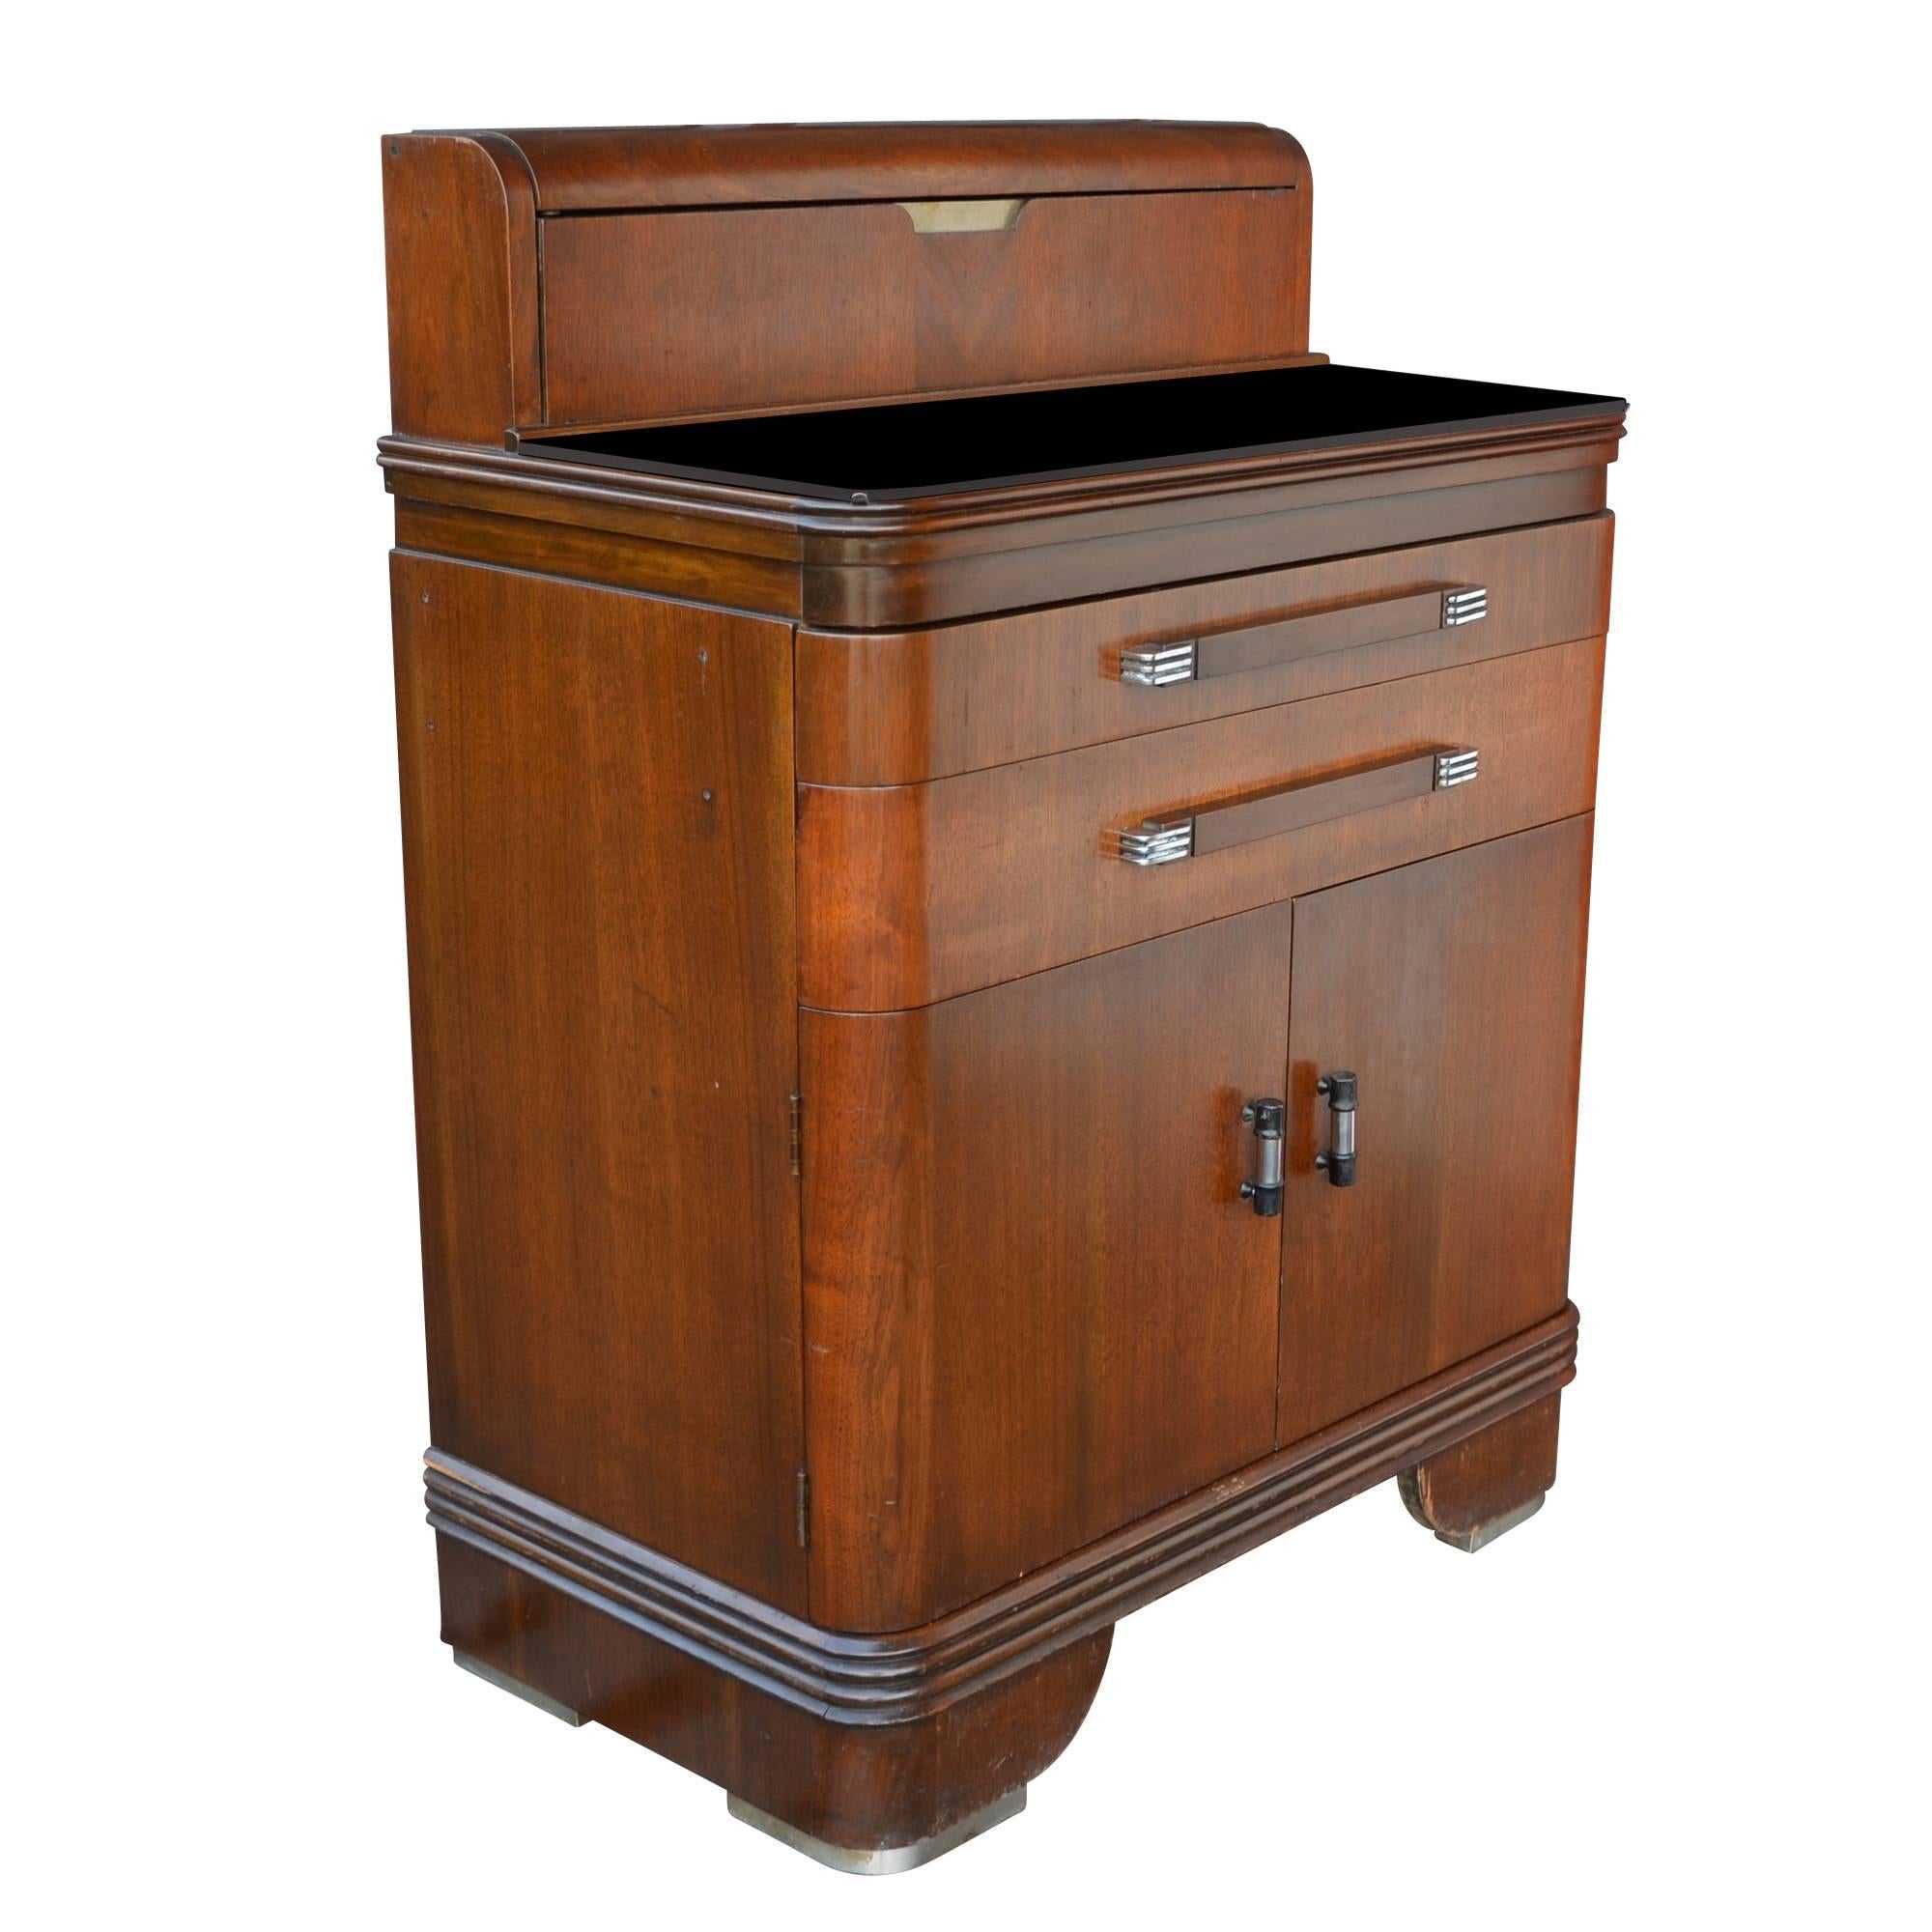 Made by the Hamilton Cabinet Company, this smart little dental cabinet has lots of great features: a handy work surface, eight drawers for storage and rolling casters. But function isn't everything with this cabinet, it also brings dapper Streamline